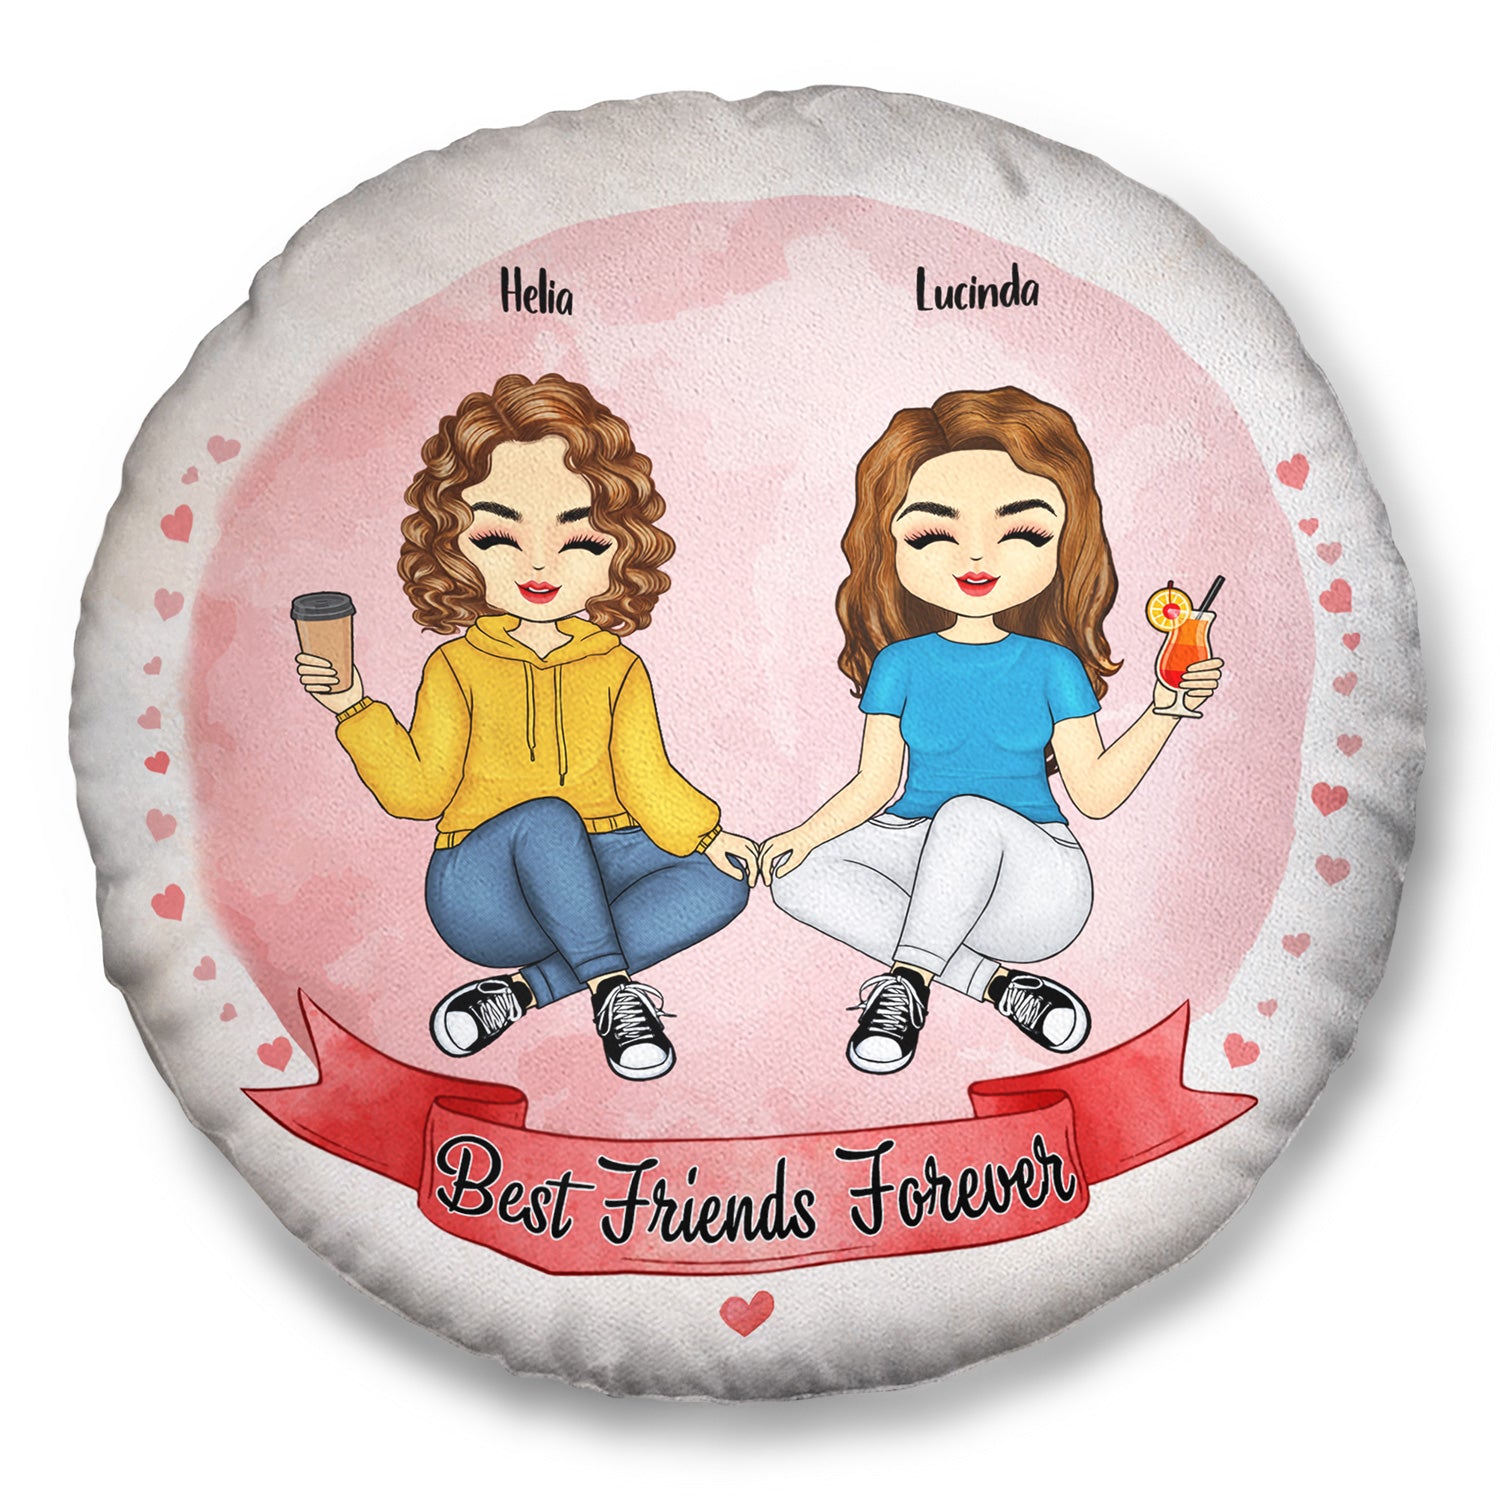 Best Friends Forever - Birthday Gift For BFF Besties, Sisters, Siblings, Girls - Personalized Custom Round Pillow